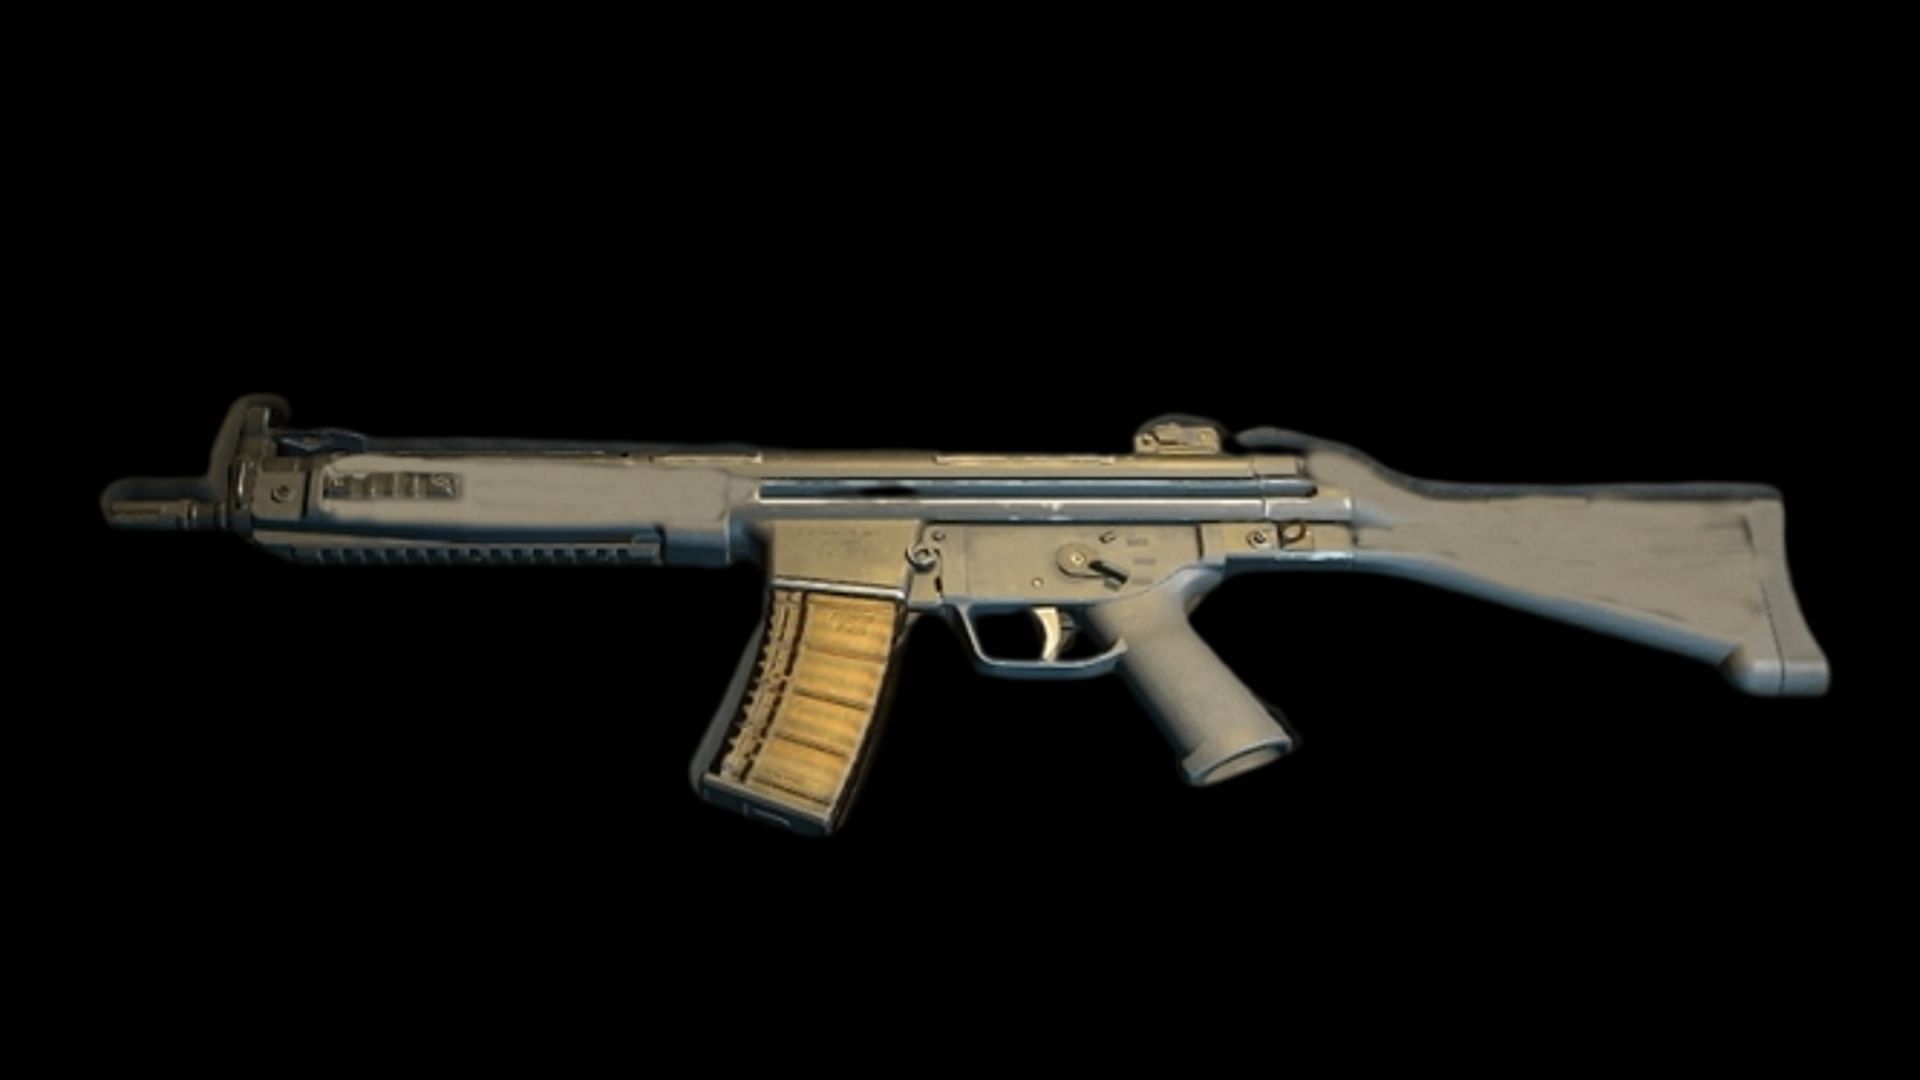 The Lachmann-556 assault rifle in MW2 (Image via Activision)